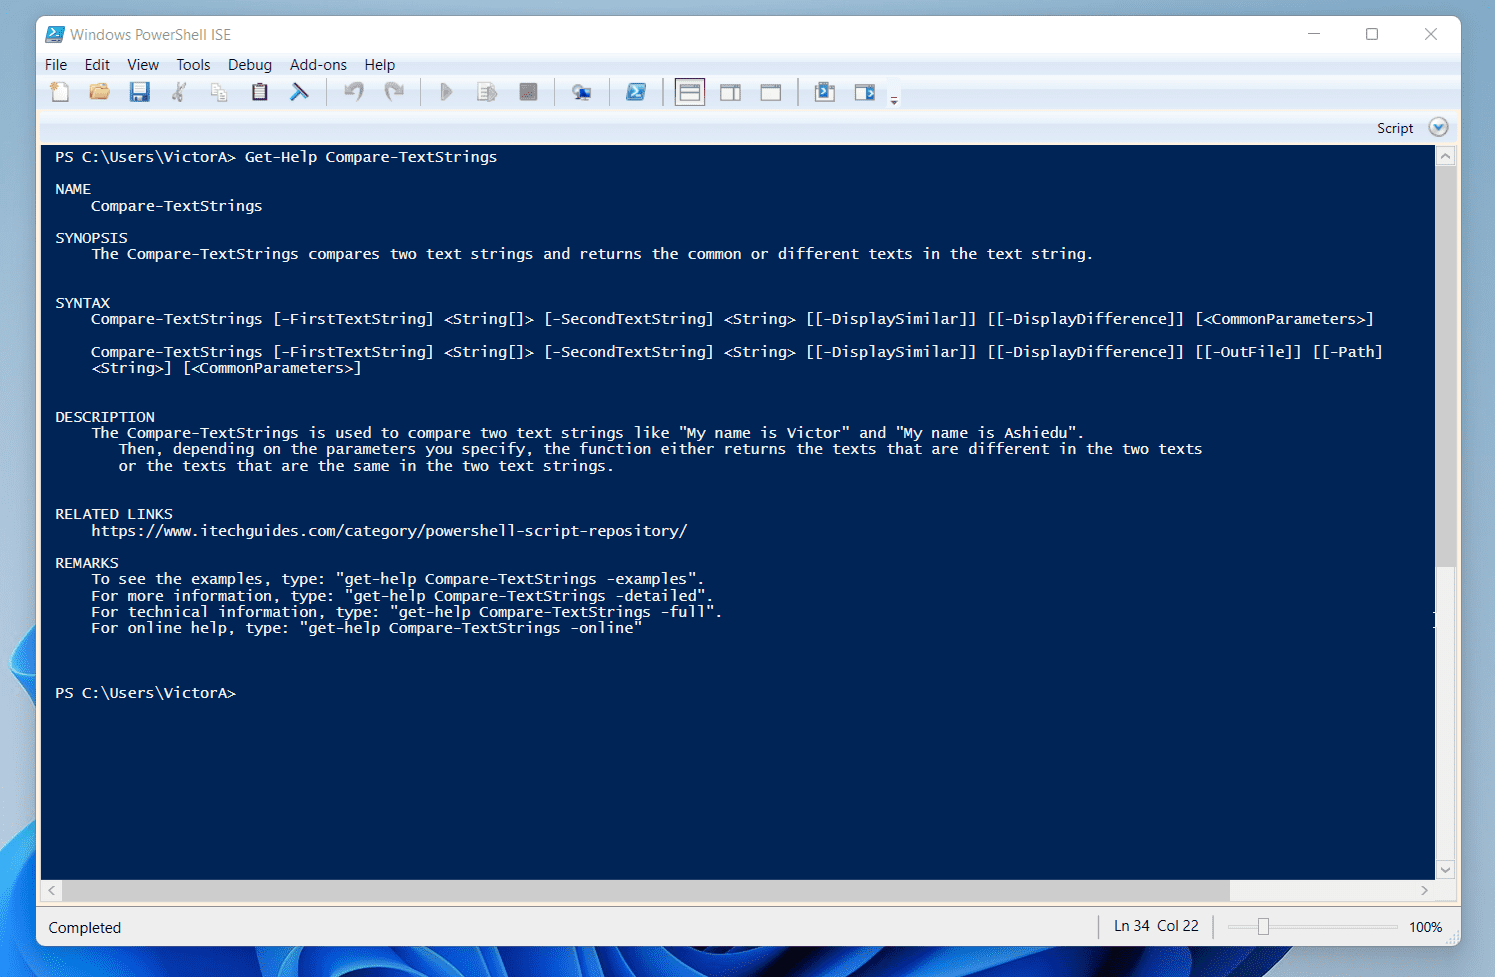 Powershell Script To Compare Two Text Strings (Compare-Textstrings)